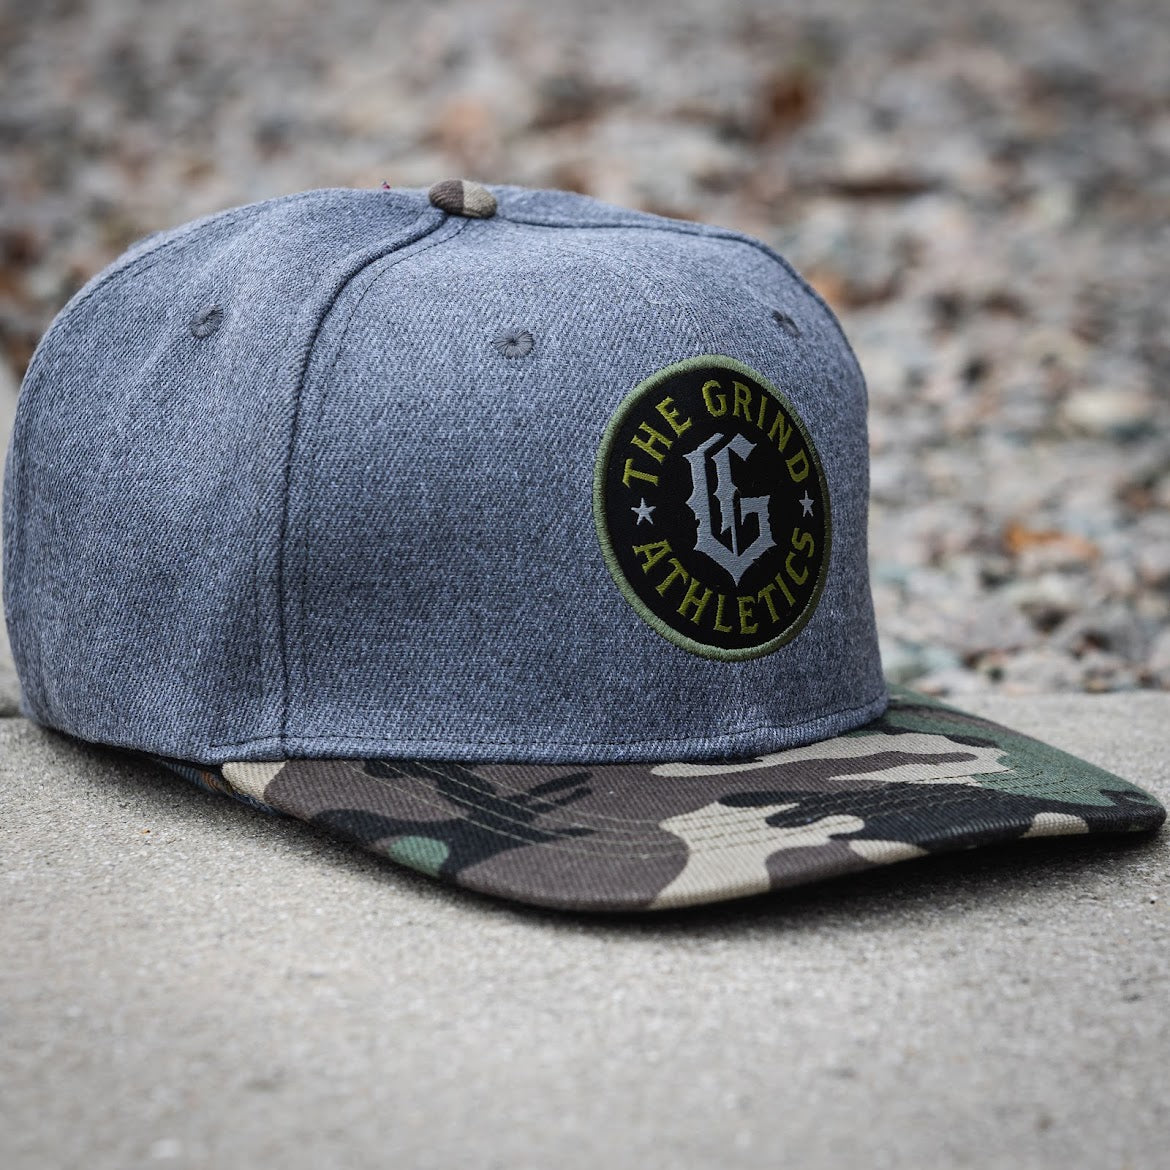 The Grind Athletics Camo and Gray "G" Snapback Hat